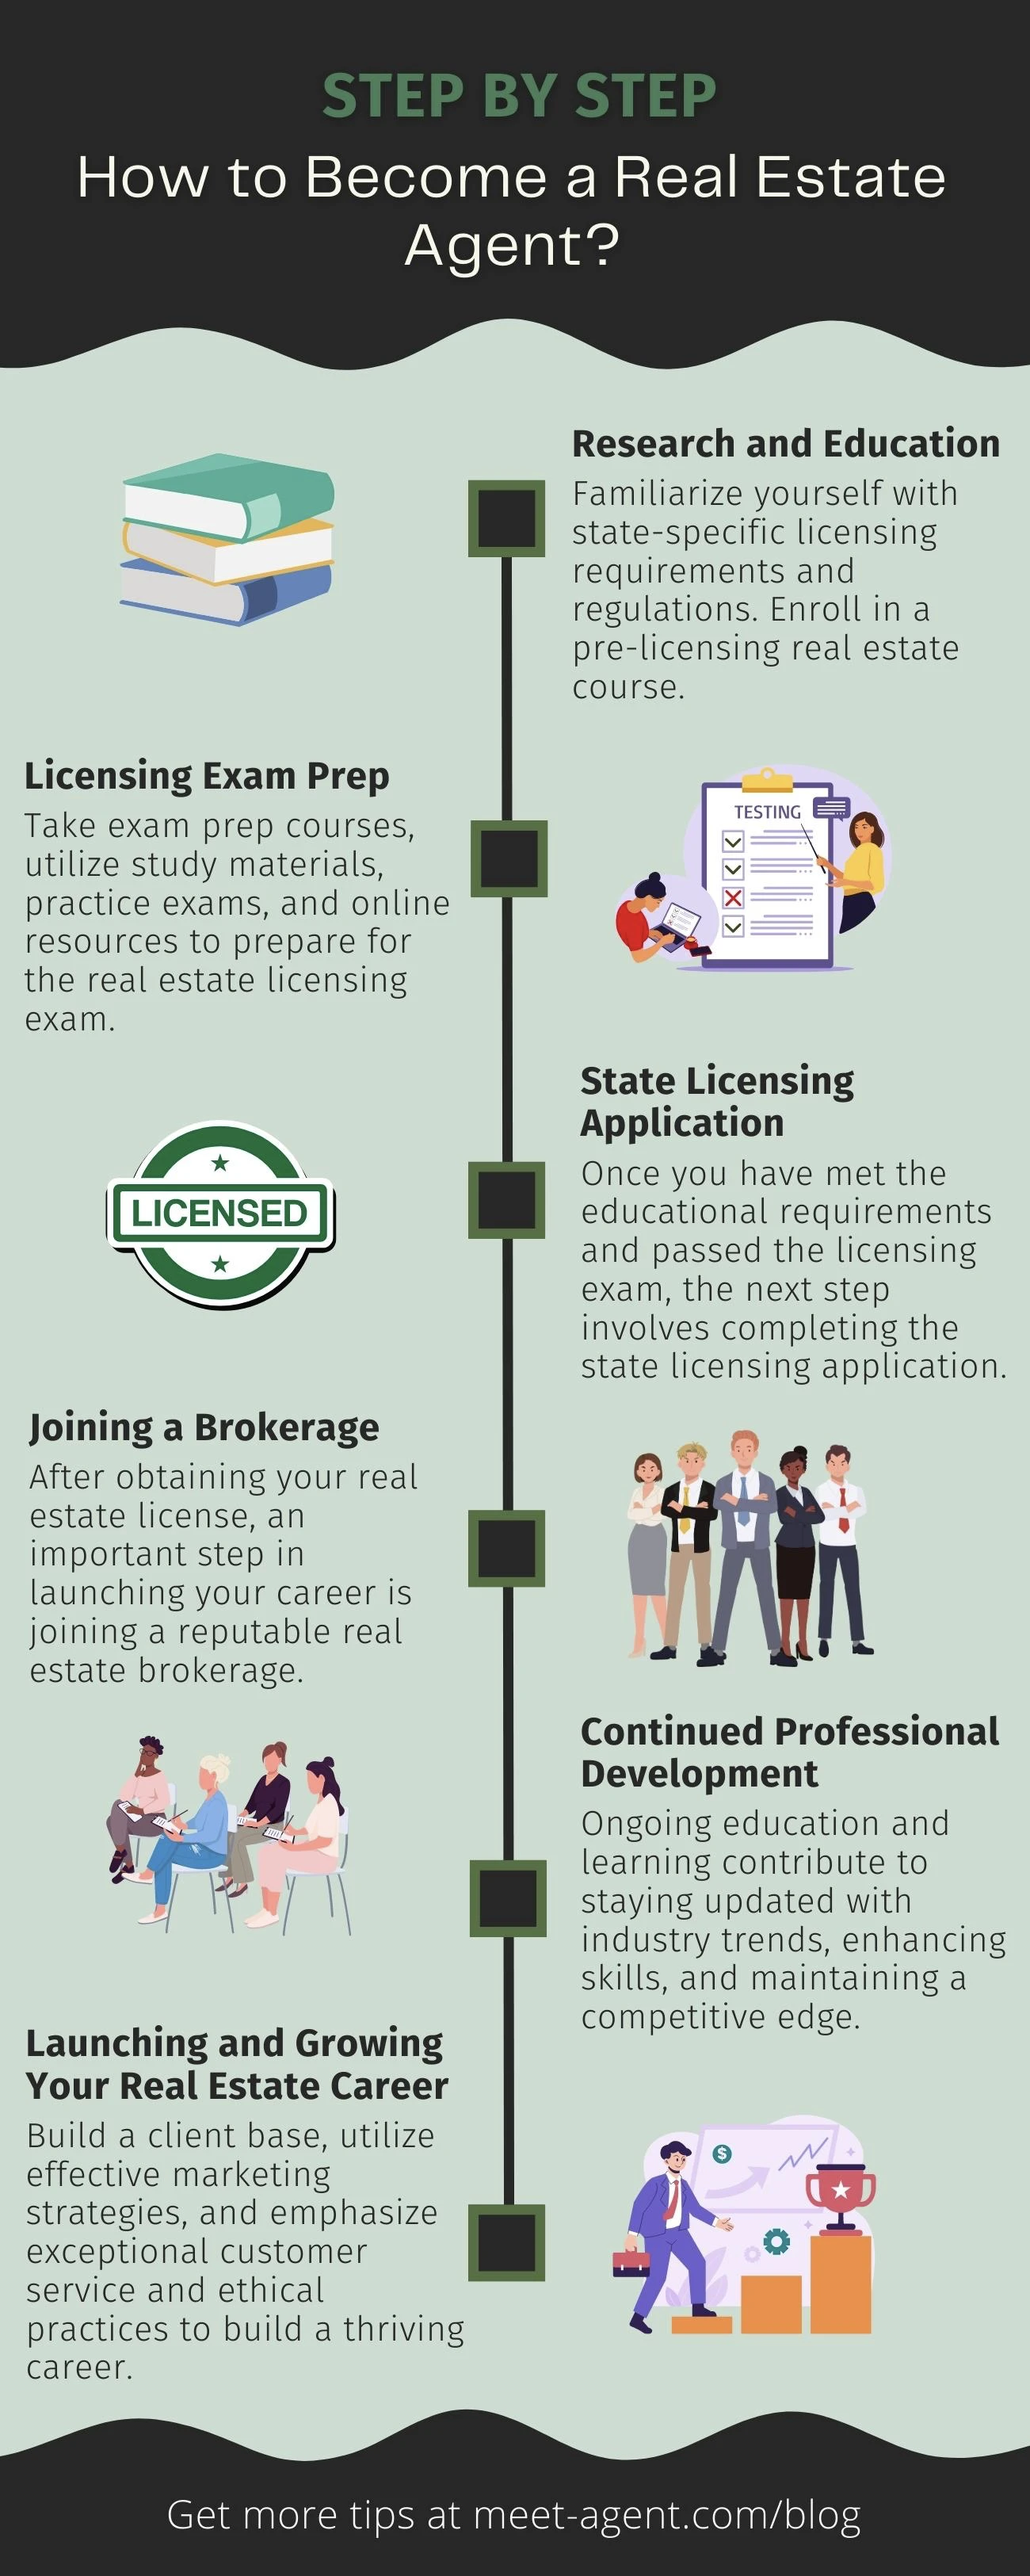 how to become real estate agent step by step